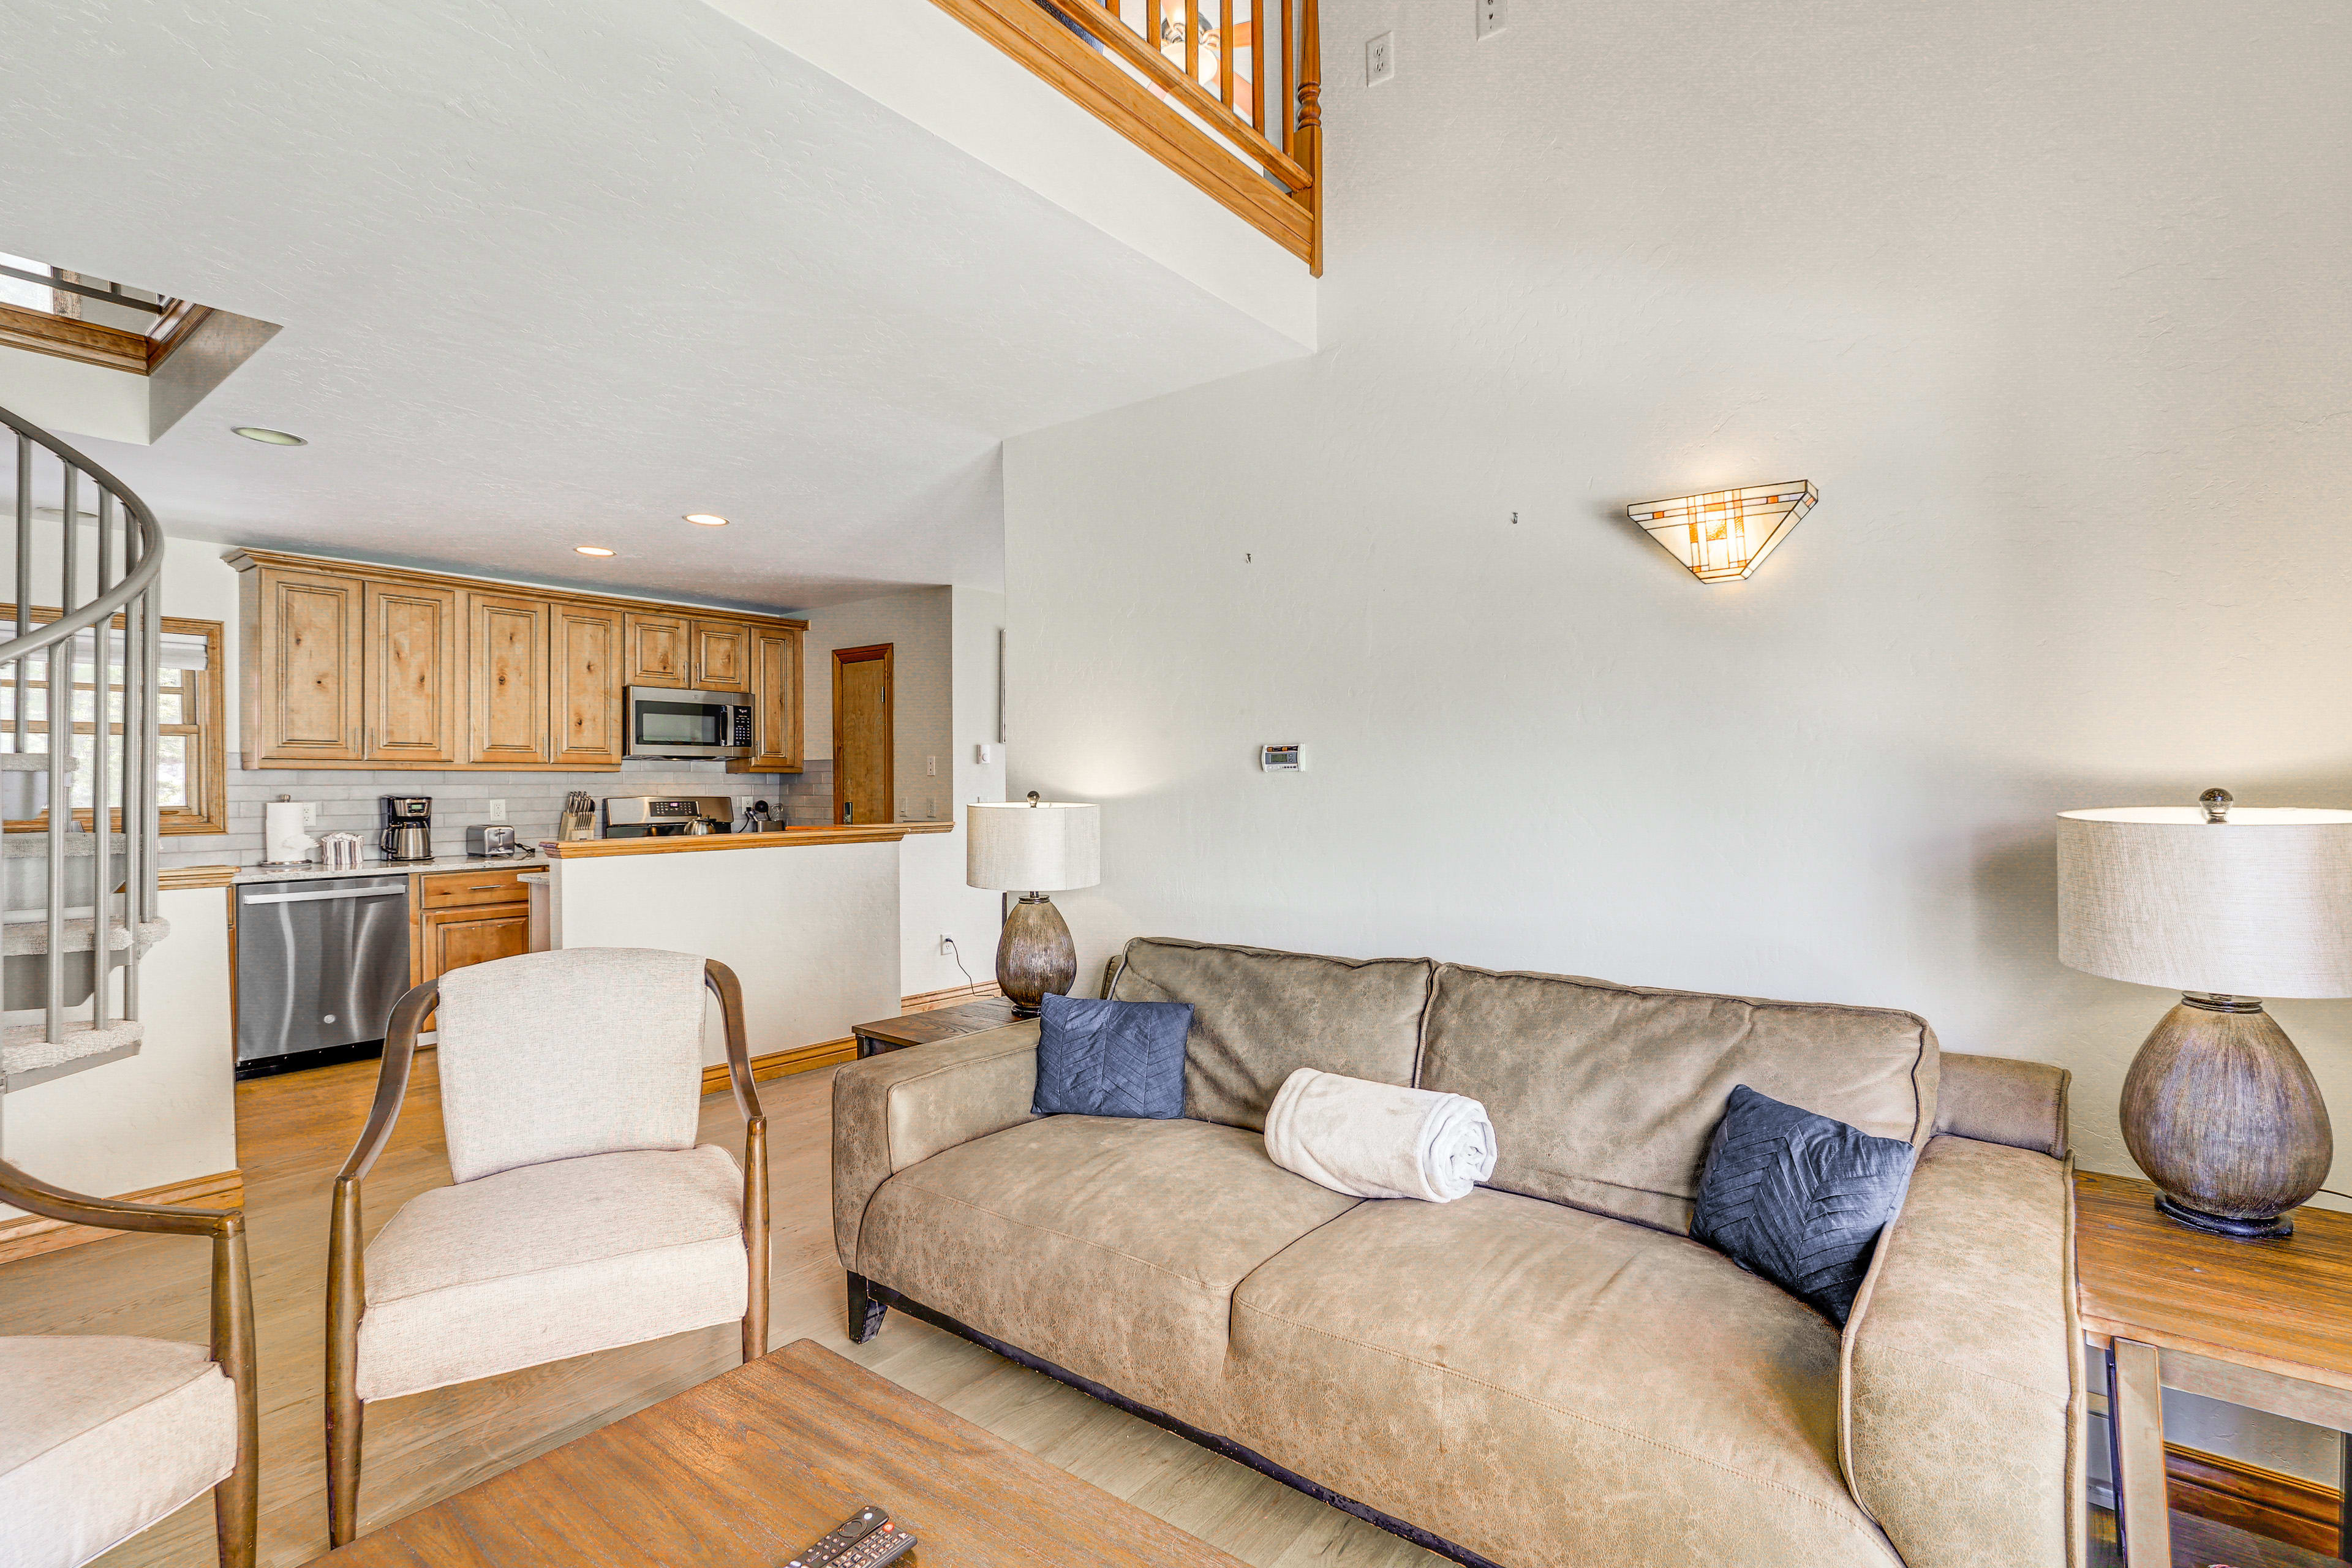 Breckenridge Vacation Rental | 3BR | 2BA | 1,319 Sq Ft | Stairs Required